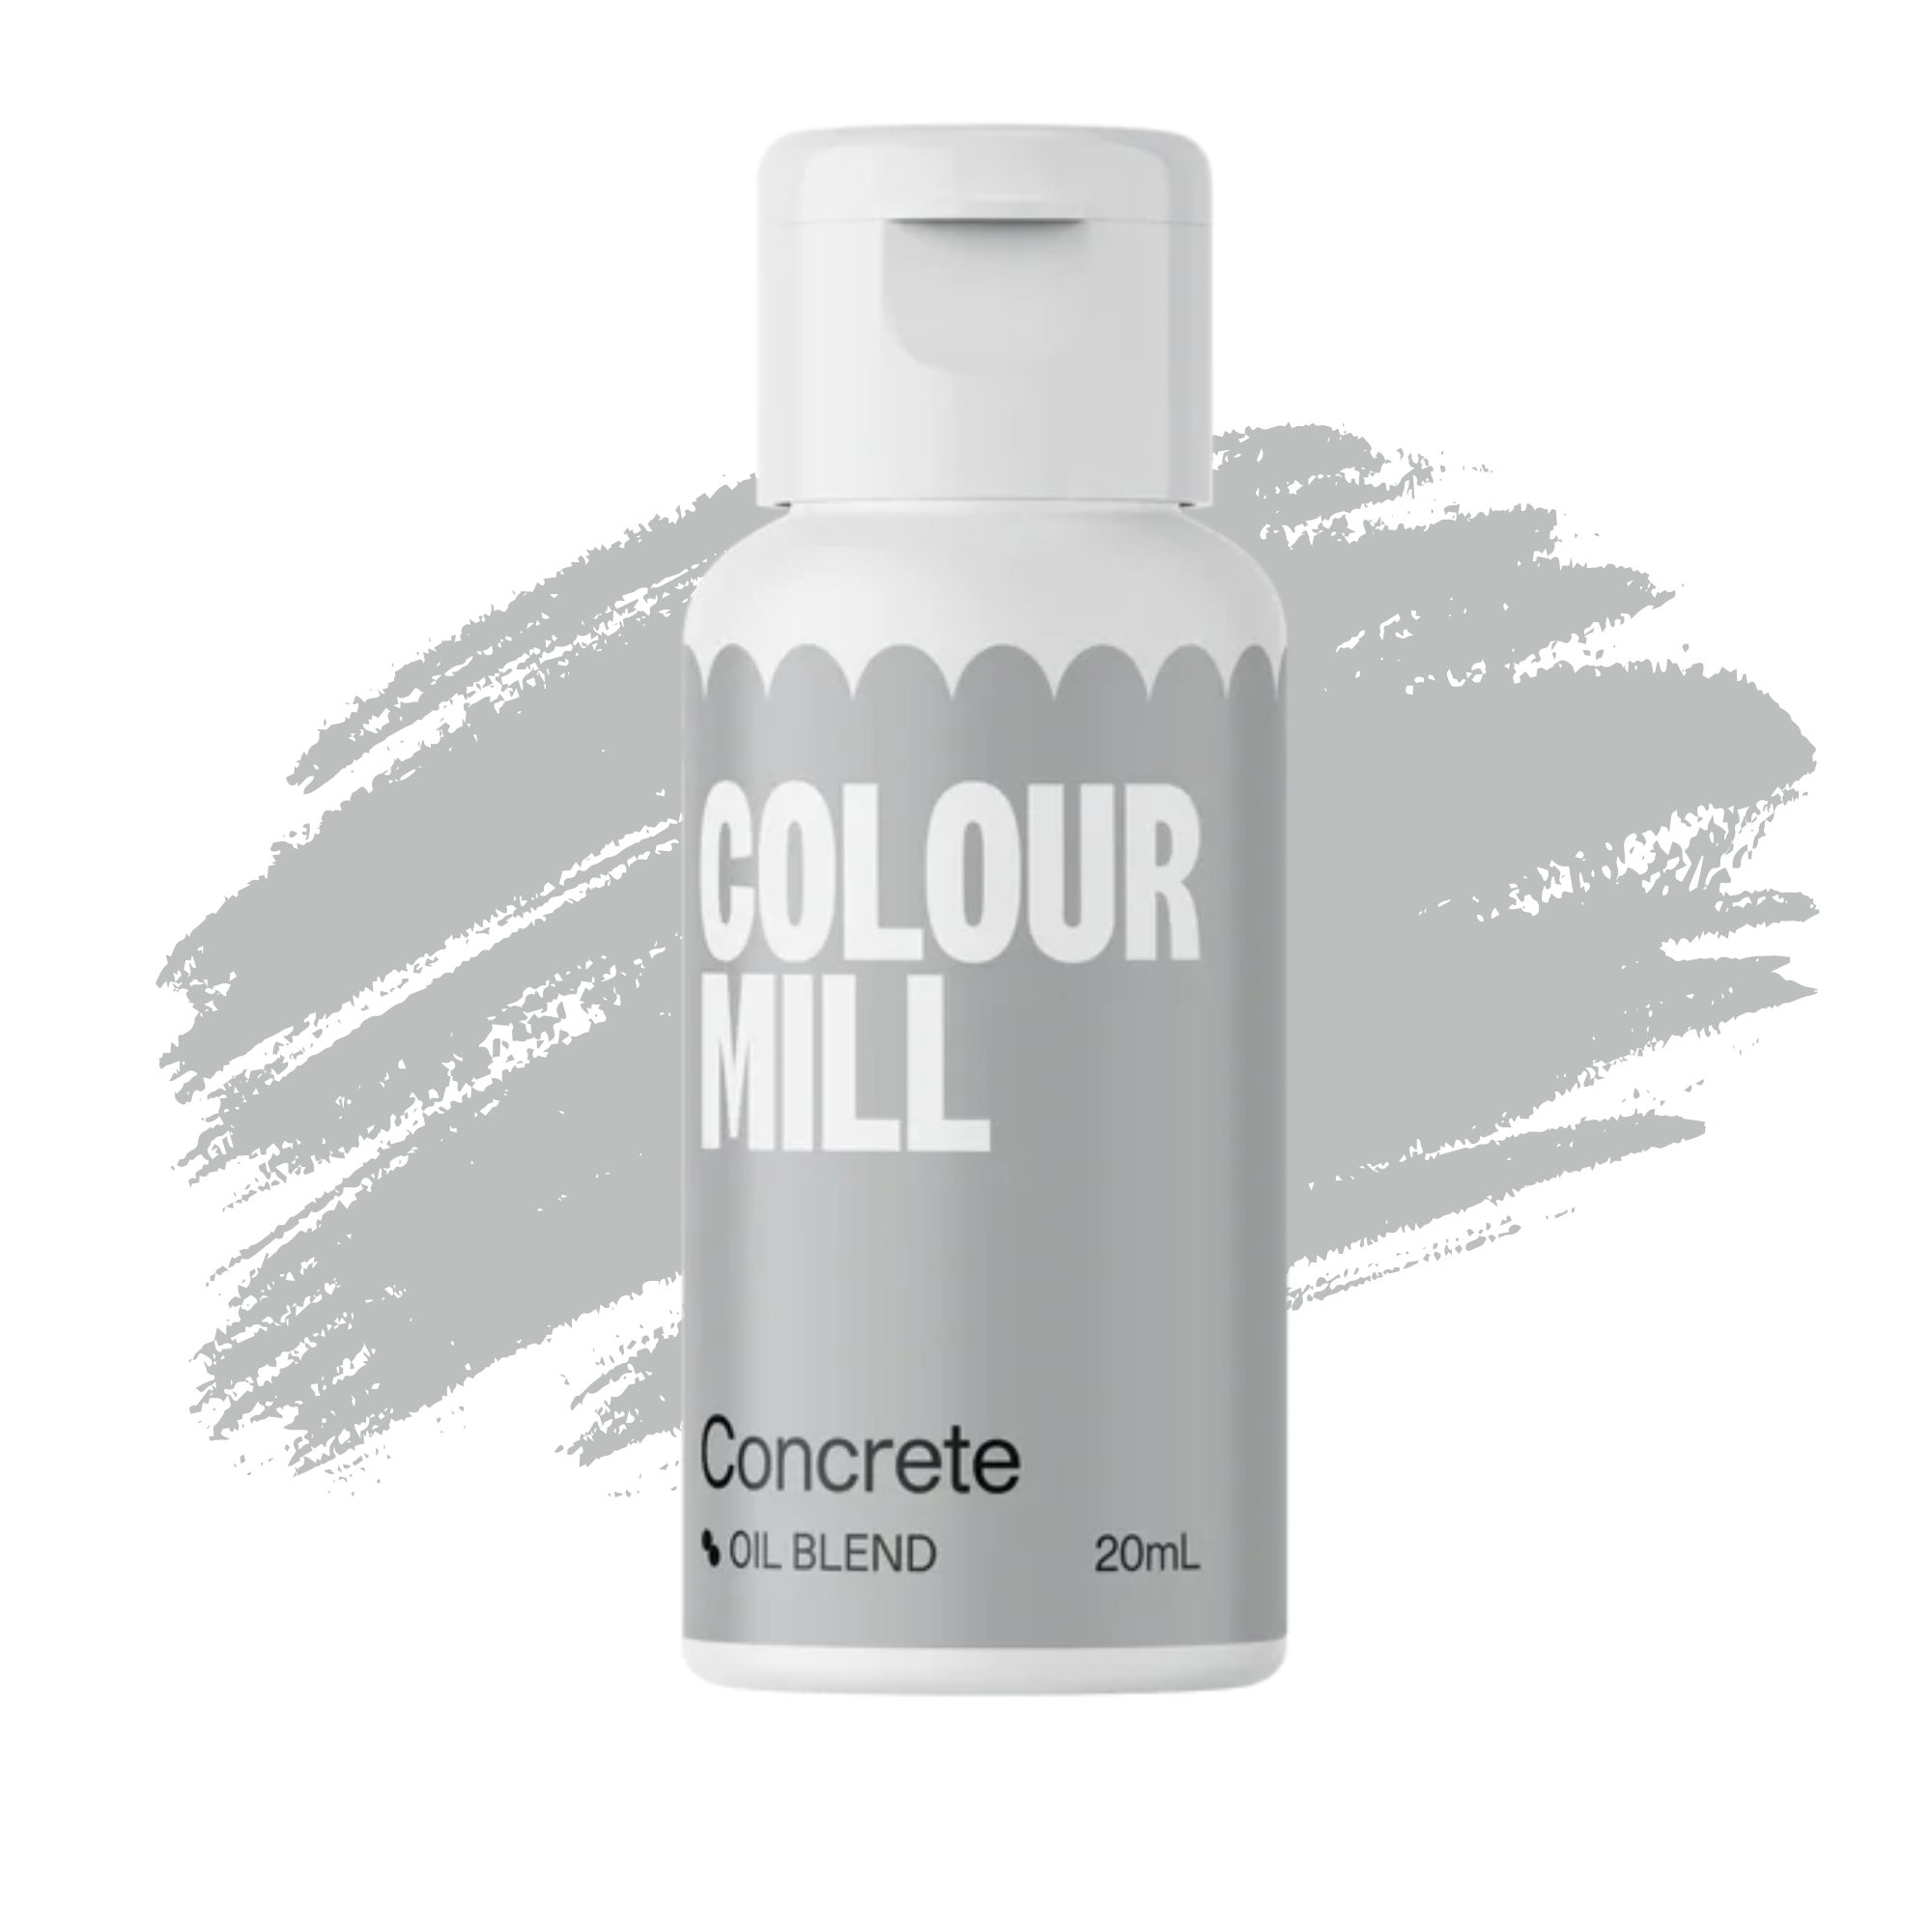 Colour Mill Concrete Food Colouring, Oil Based Food Colouring